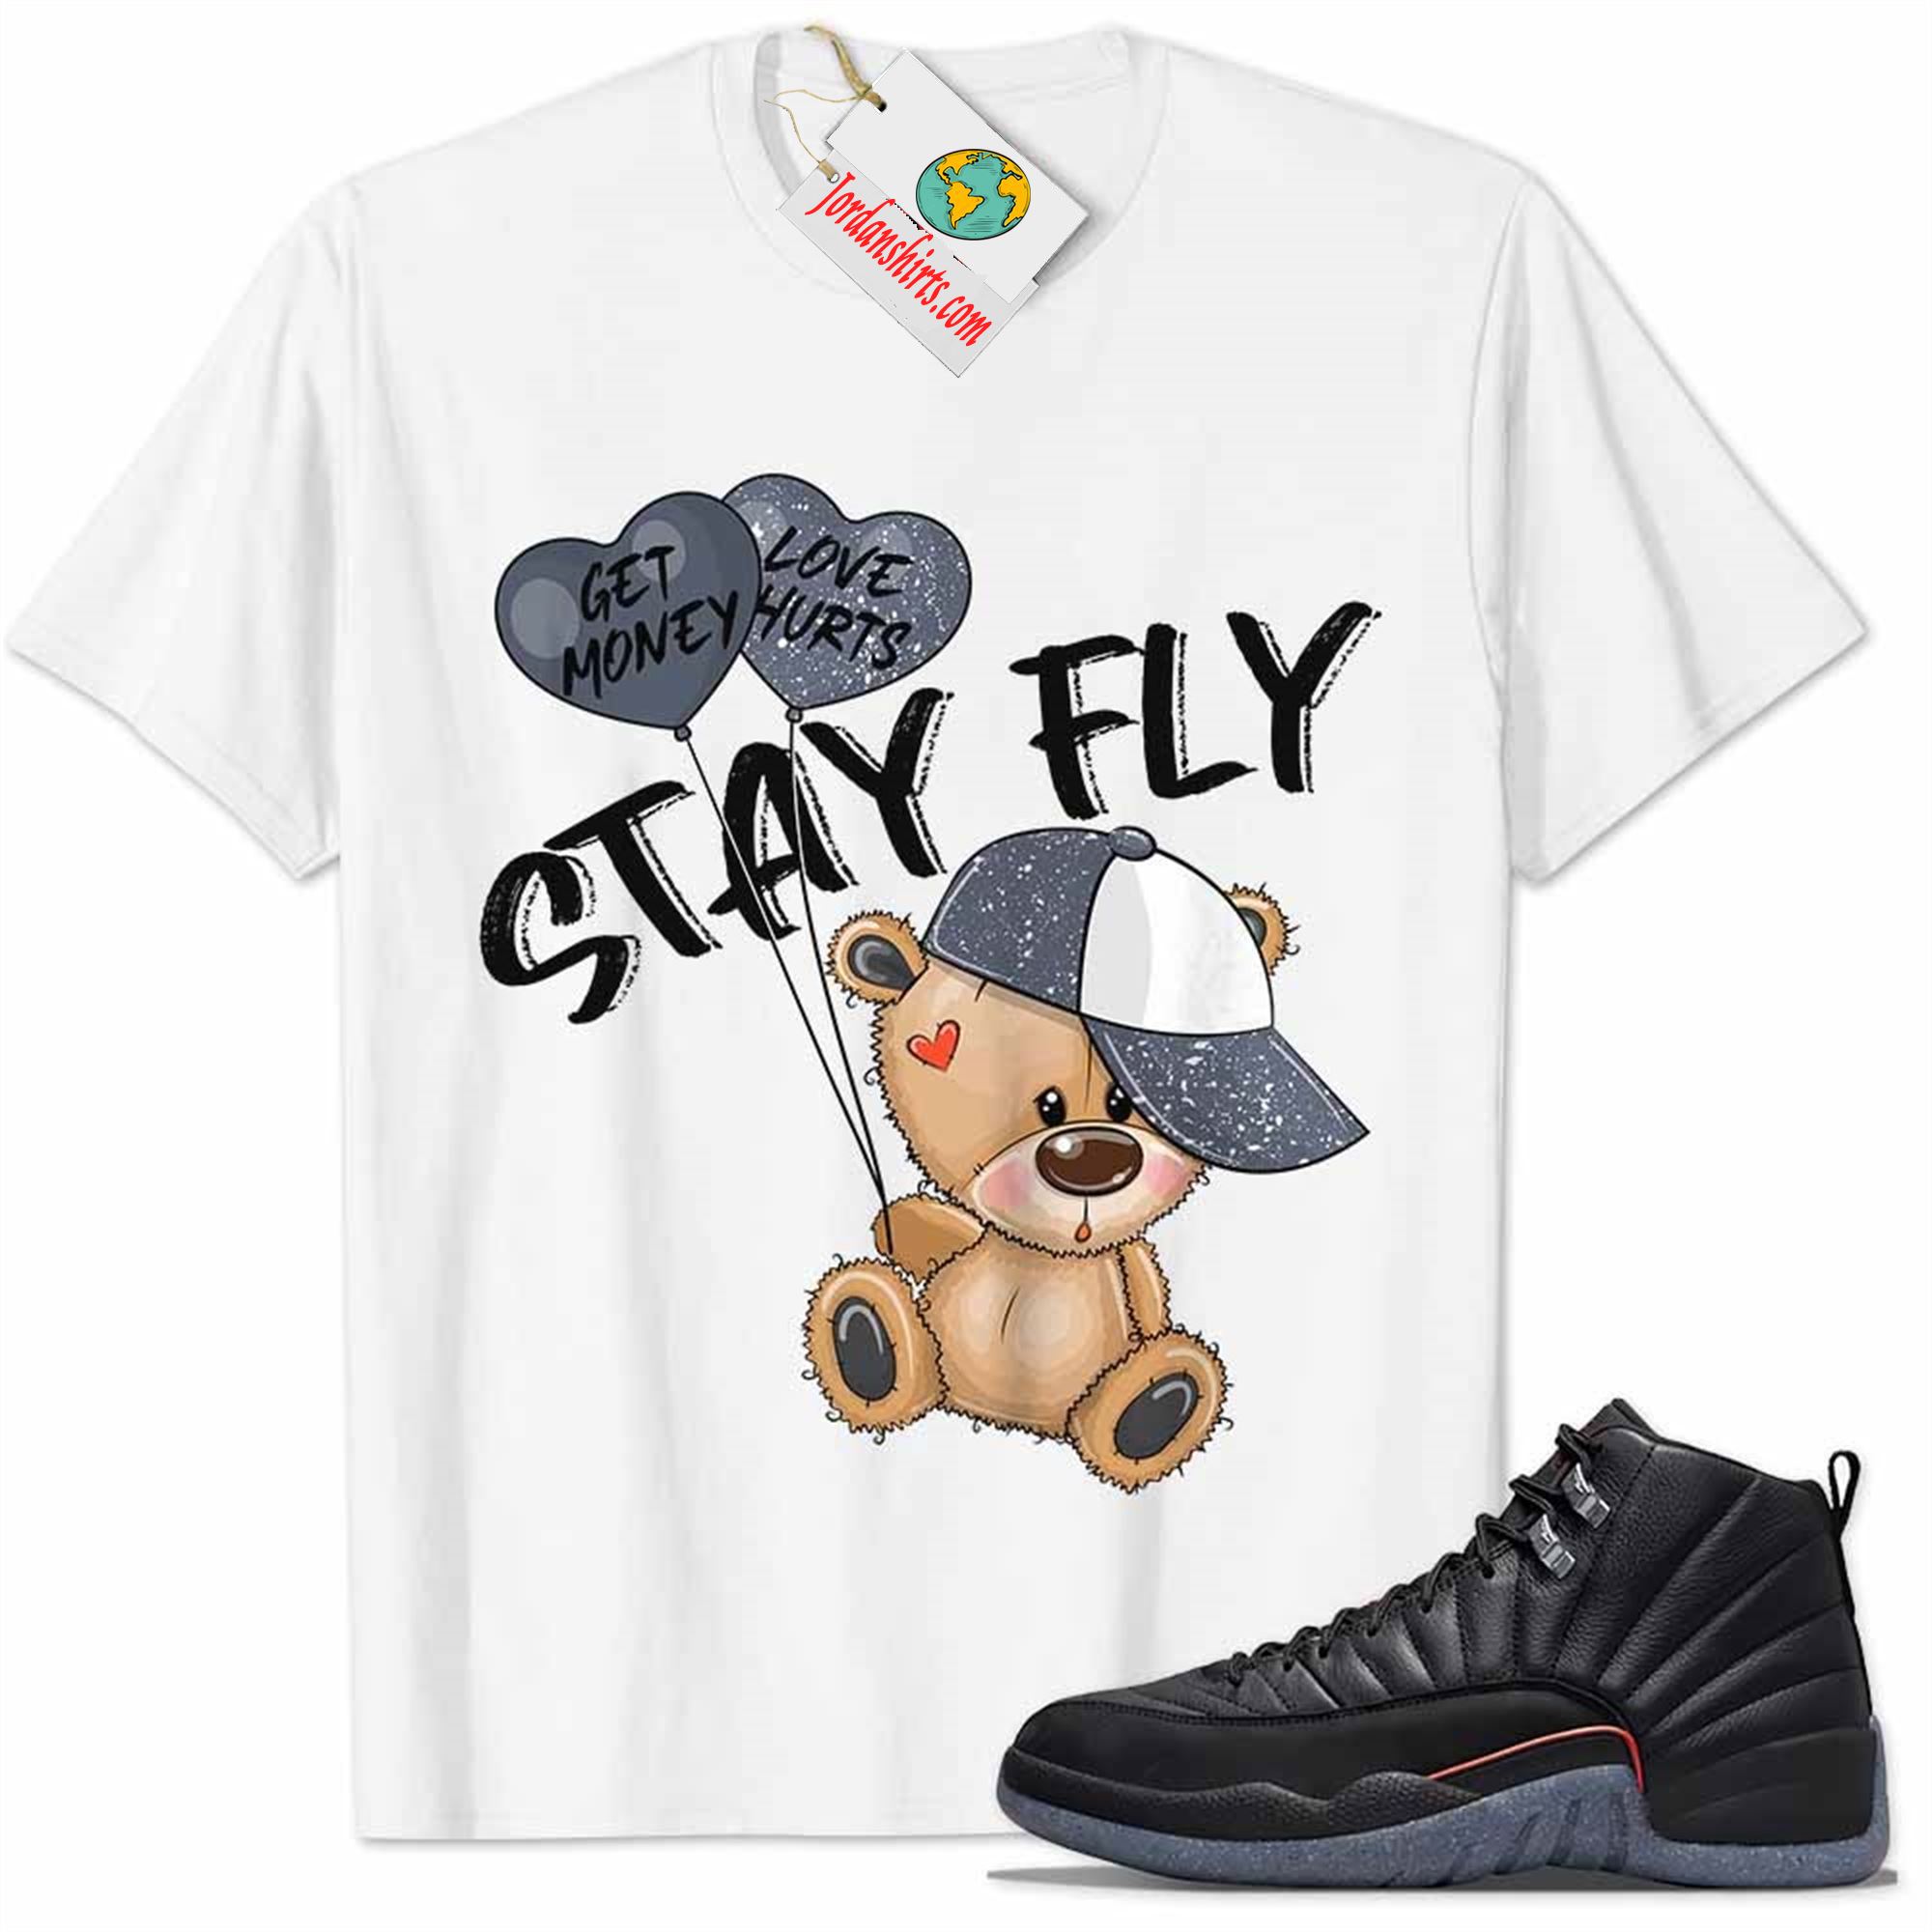 Jordan 12 Shirt, Utility Grind 12s Shirt Cute Teddy Bear Stay Fly Get Money White Full Size Up To 5xl